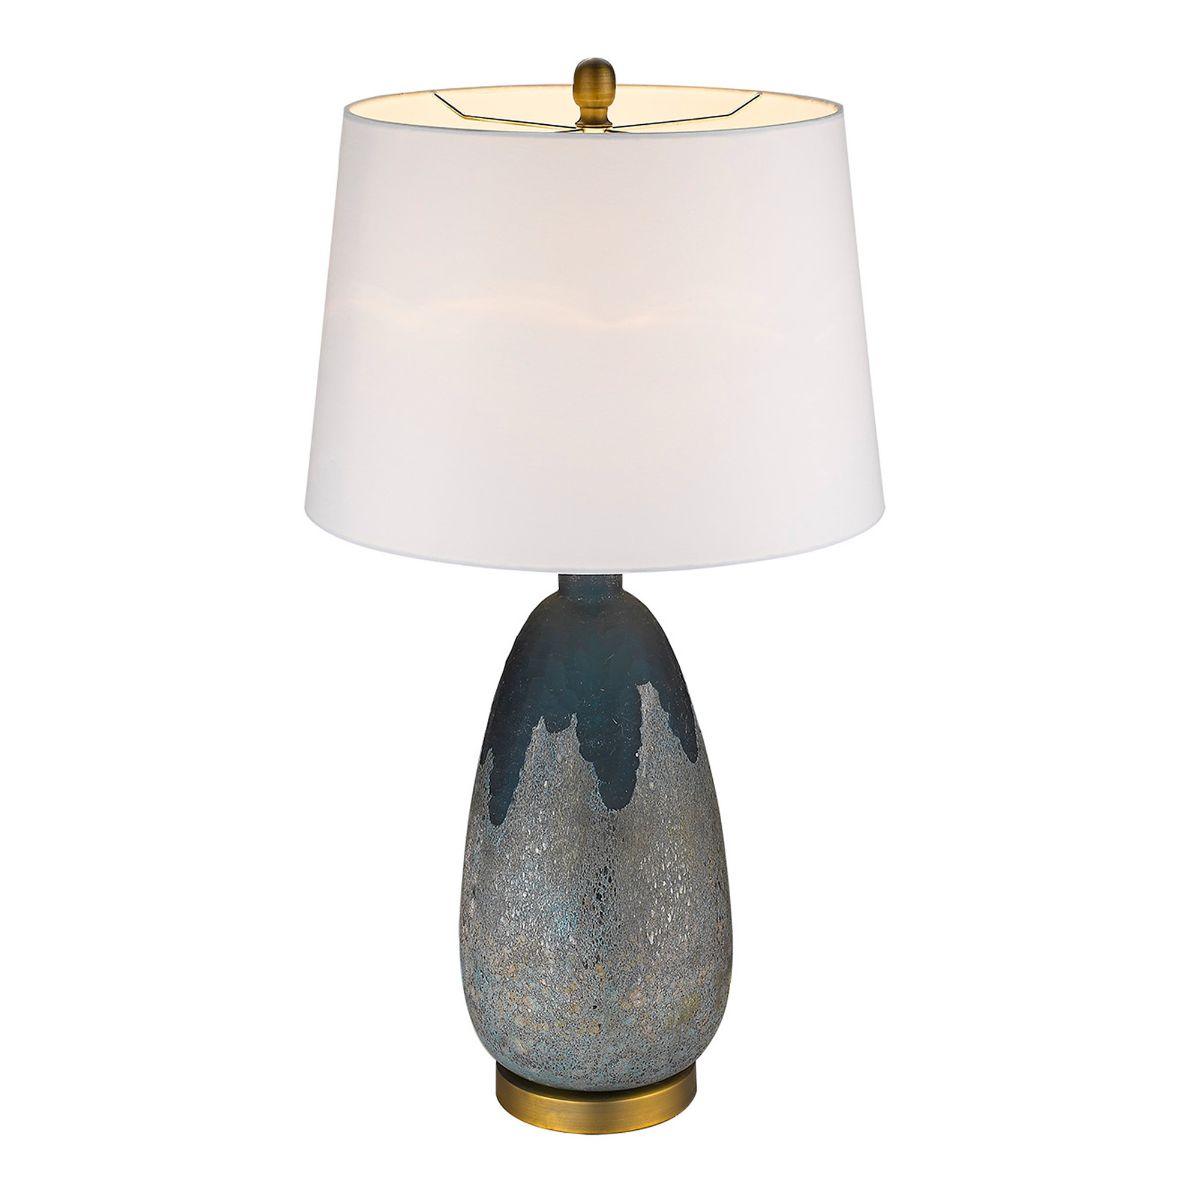 Trend Home 1 Light 30 inches Table Lamp Blue/Brown Glass Body and Brass Accents